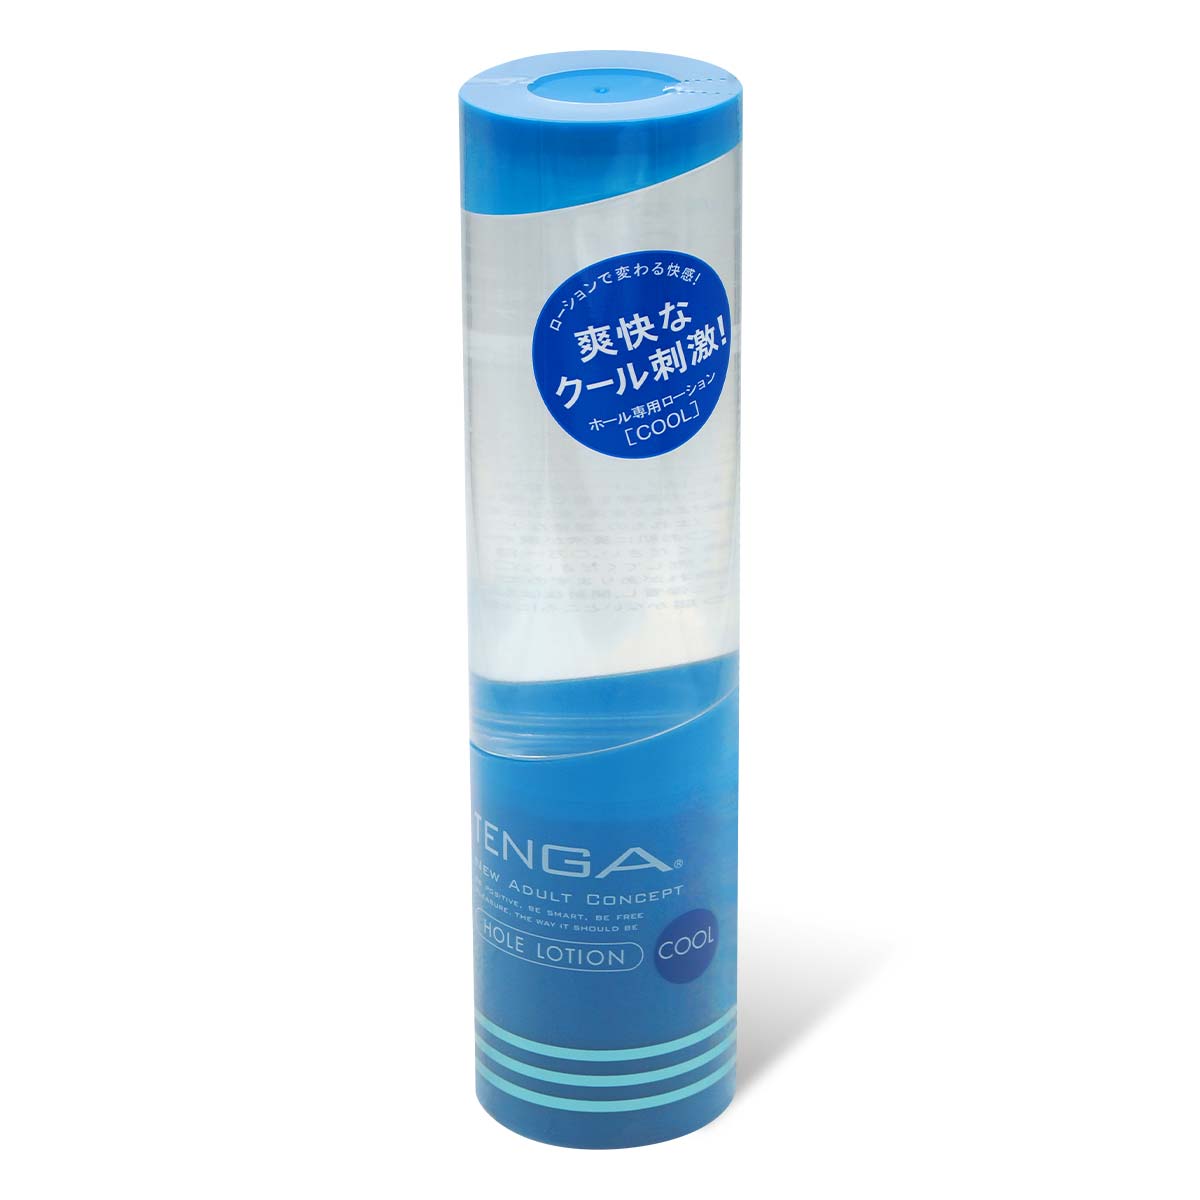 TENGA HOLE LOTION COOL 170ml Water-based Lubricant-p_1